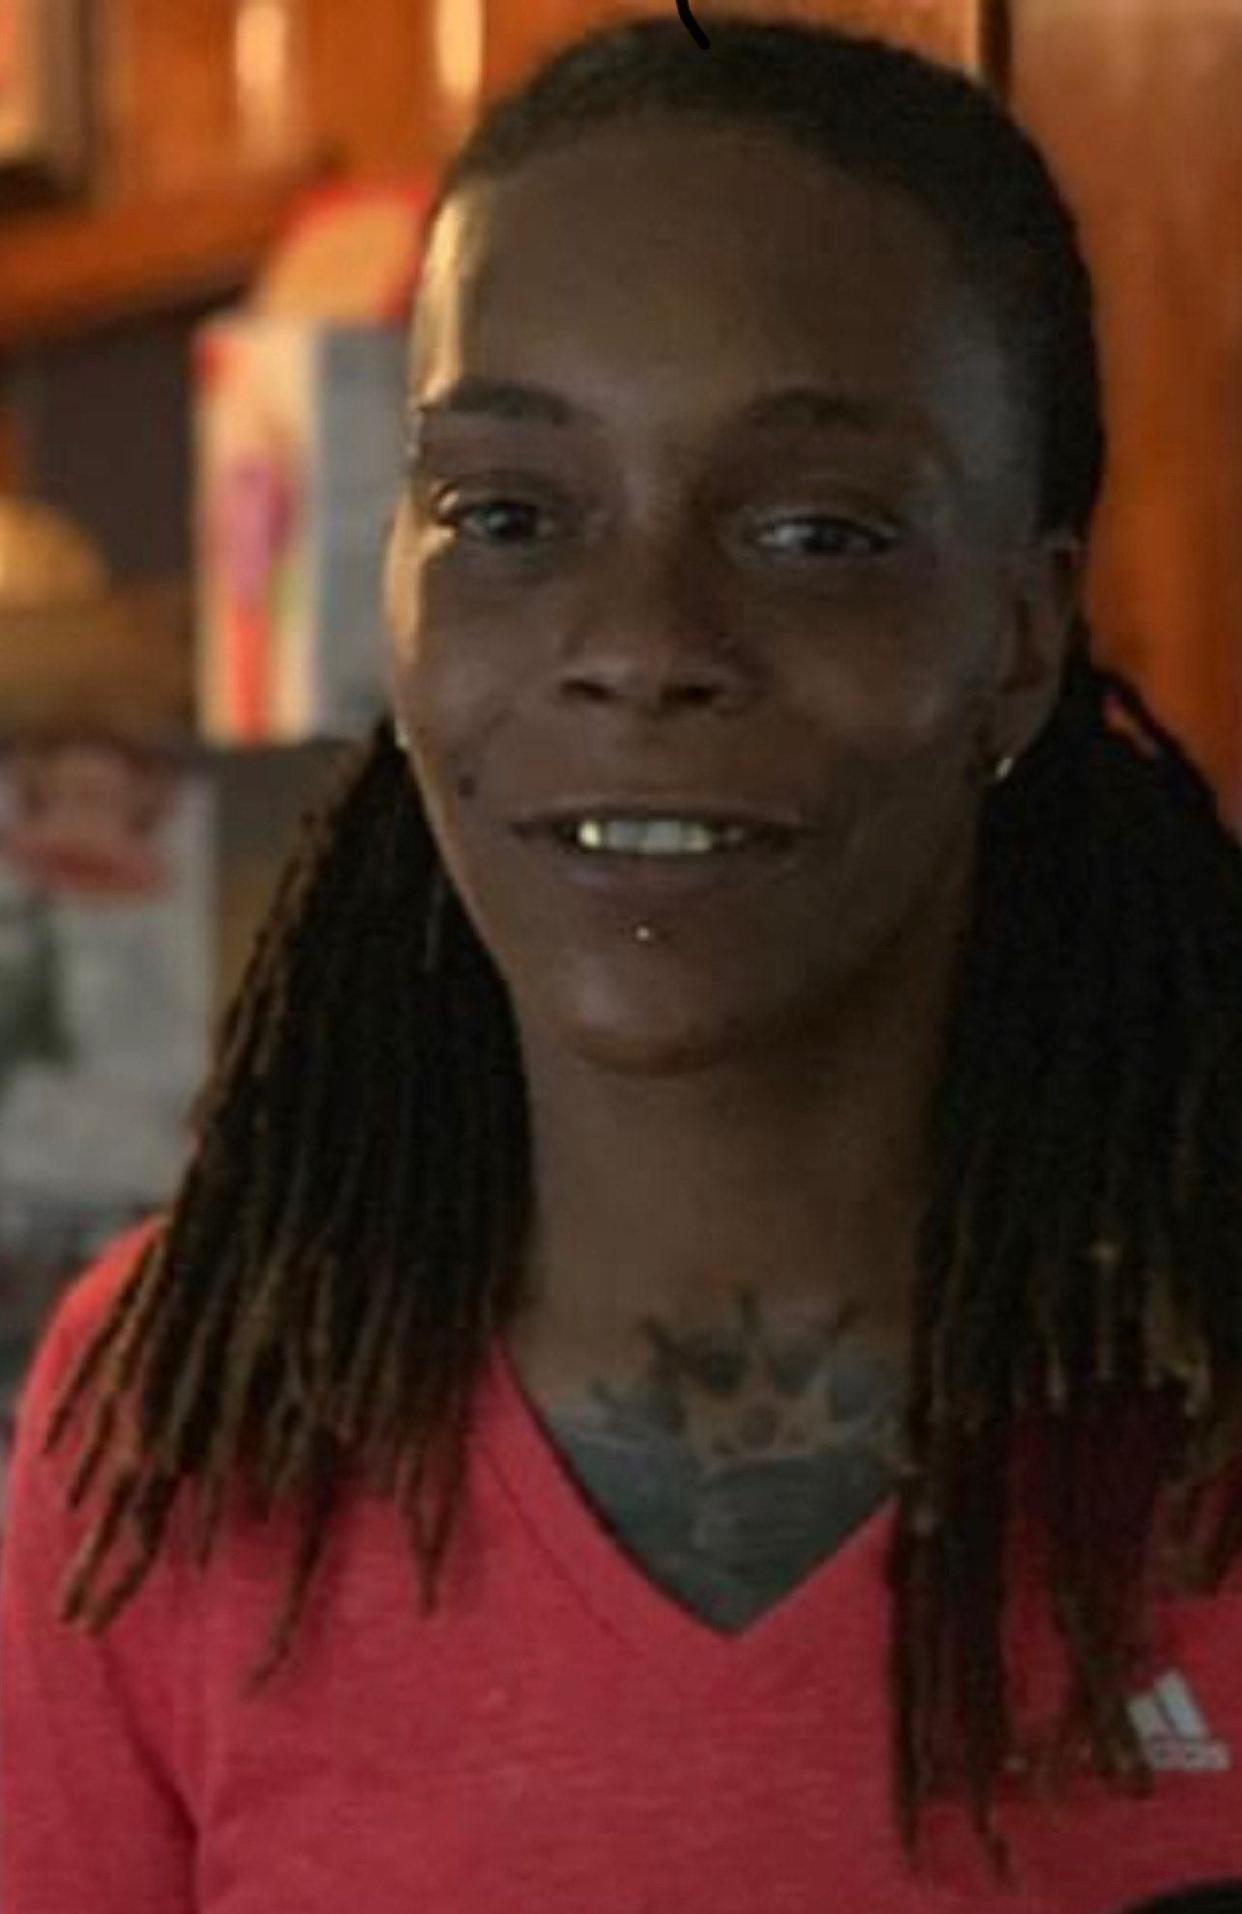 The mother of Rose Marie Taylor (pictured here) has filed a federal lawsuit accusing three Alexandria Police Department officers of being responsible for her death. Taylor died on May 30, 2022, after being found unresponsive in her jail cell 11 days before.